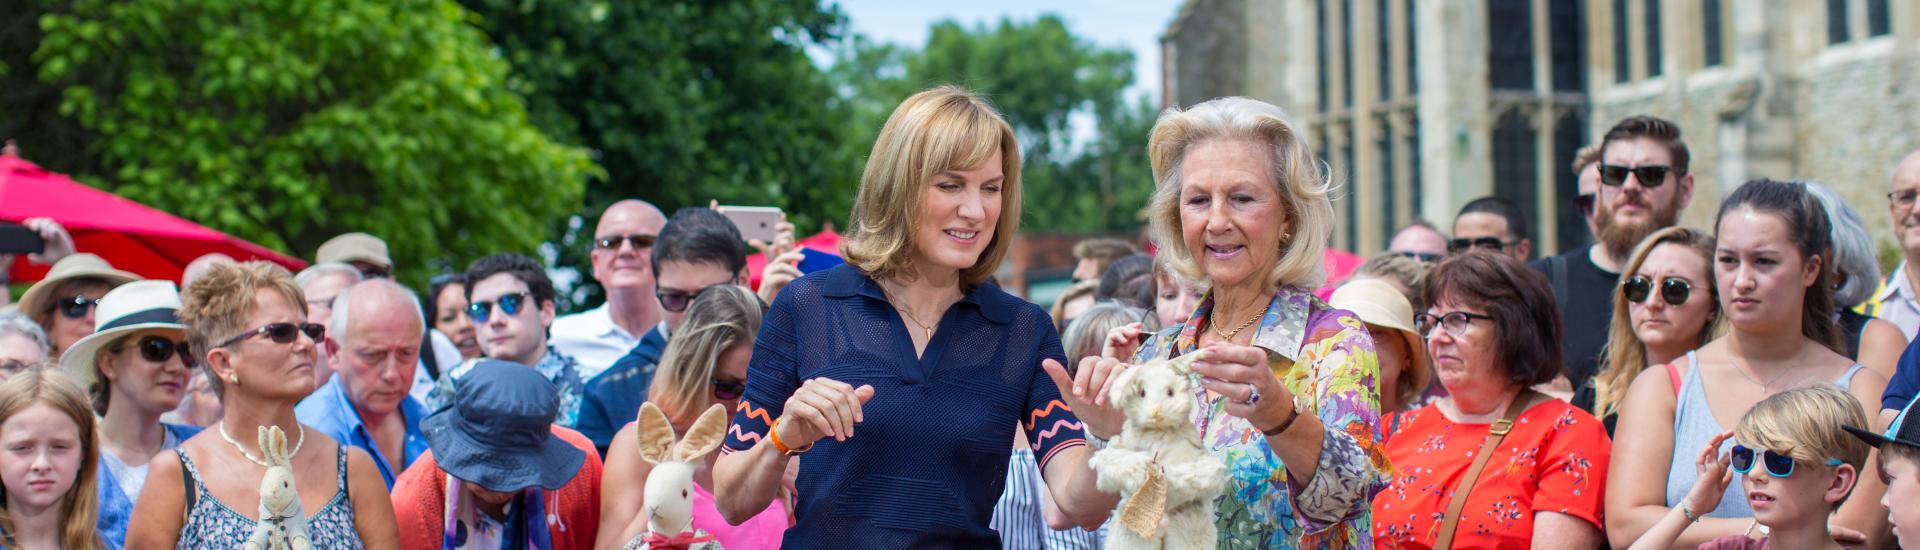 Fiona Bruce with crowd of people at the Antiques Roadshow